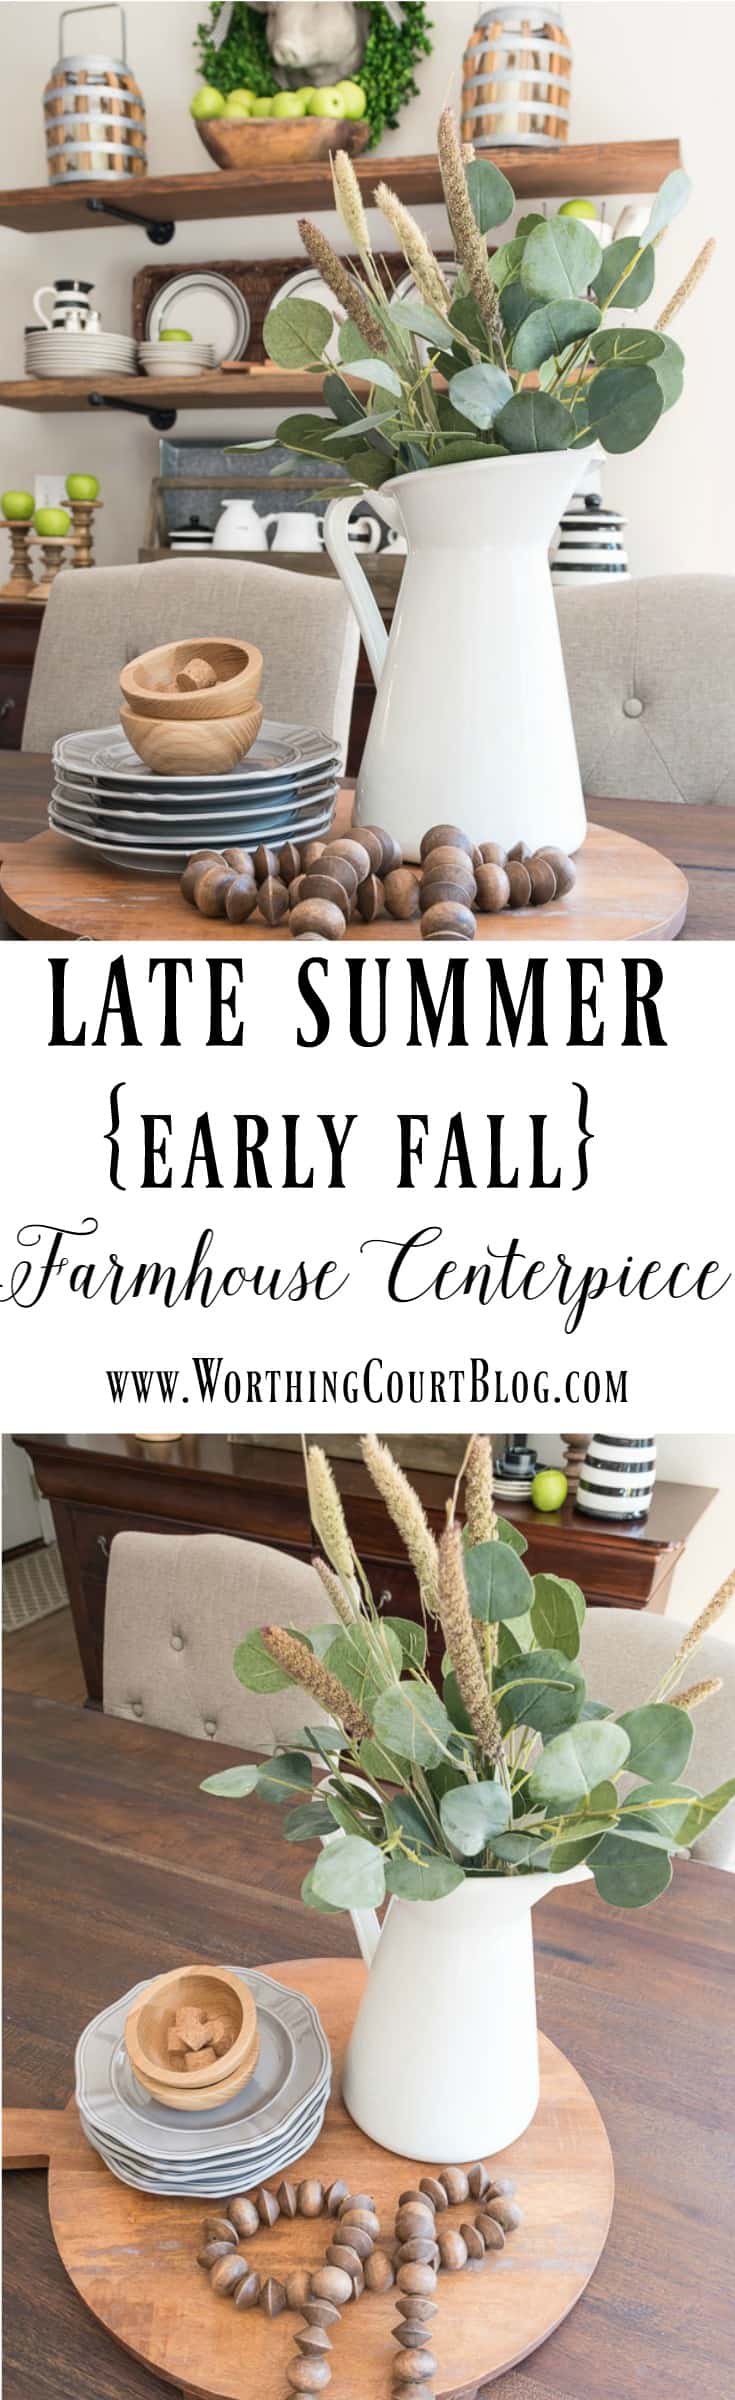 Quick Late Summer To Early Fall Farmhouse Centerpiece || Worthing Court Blog